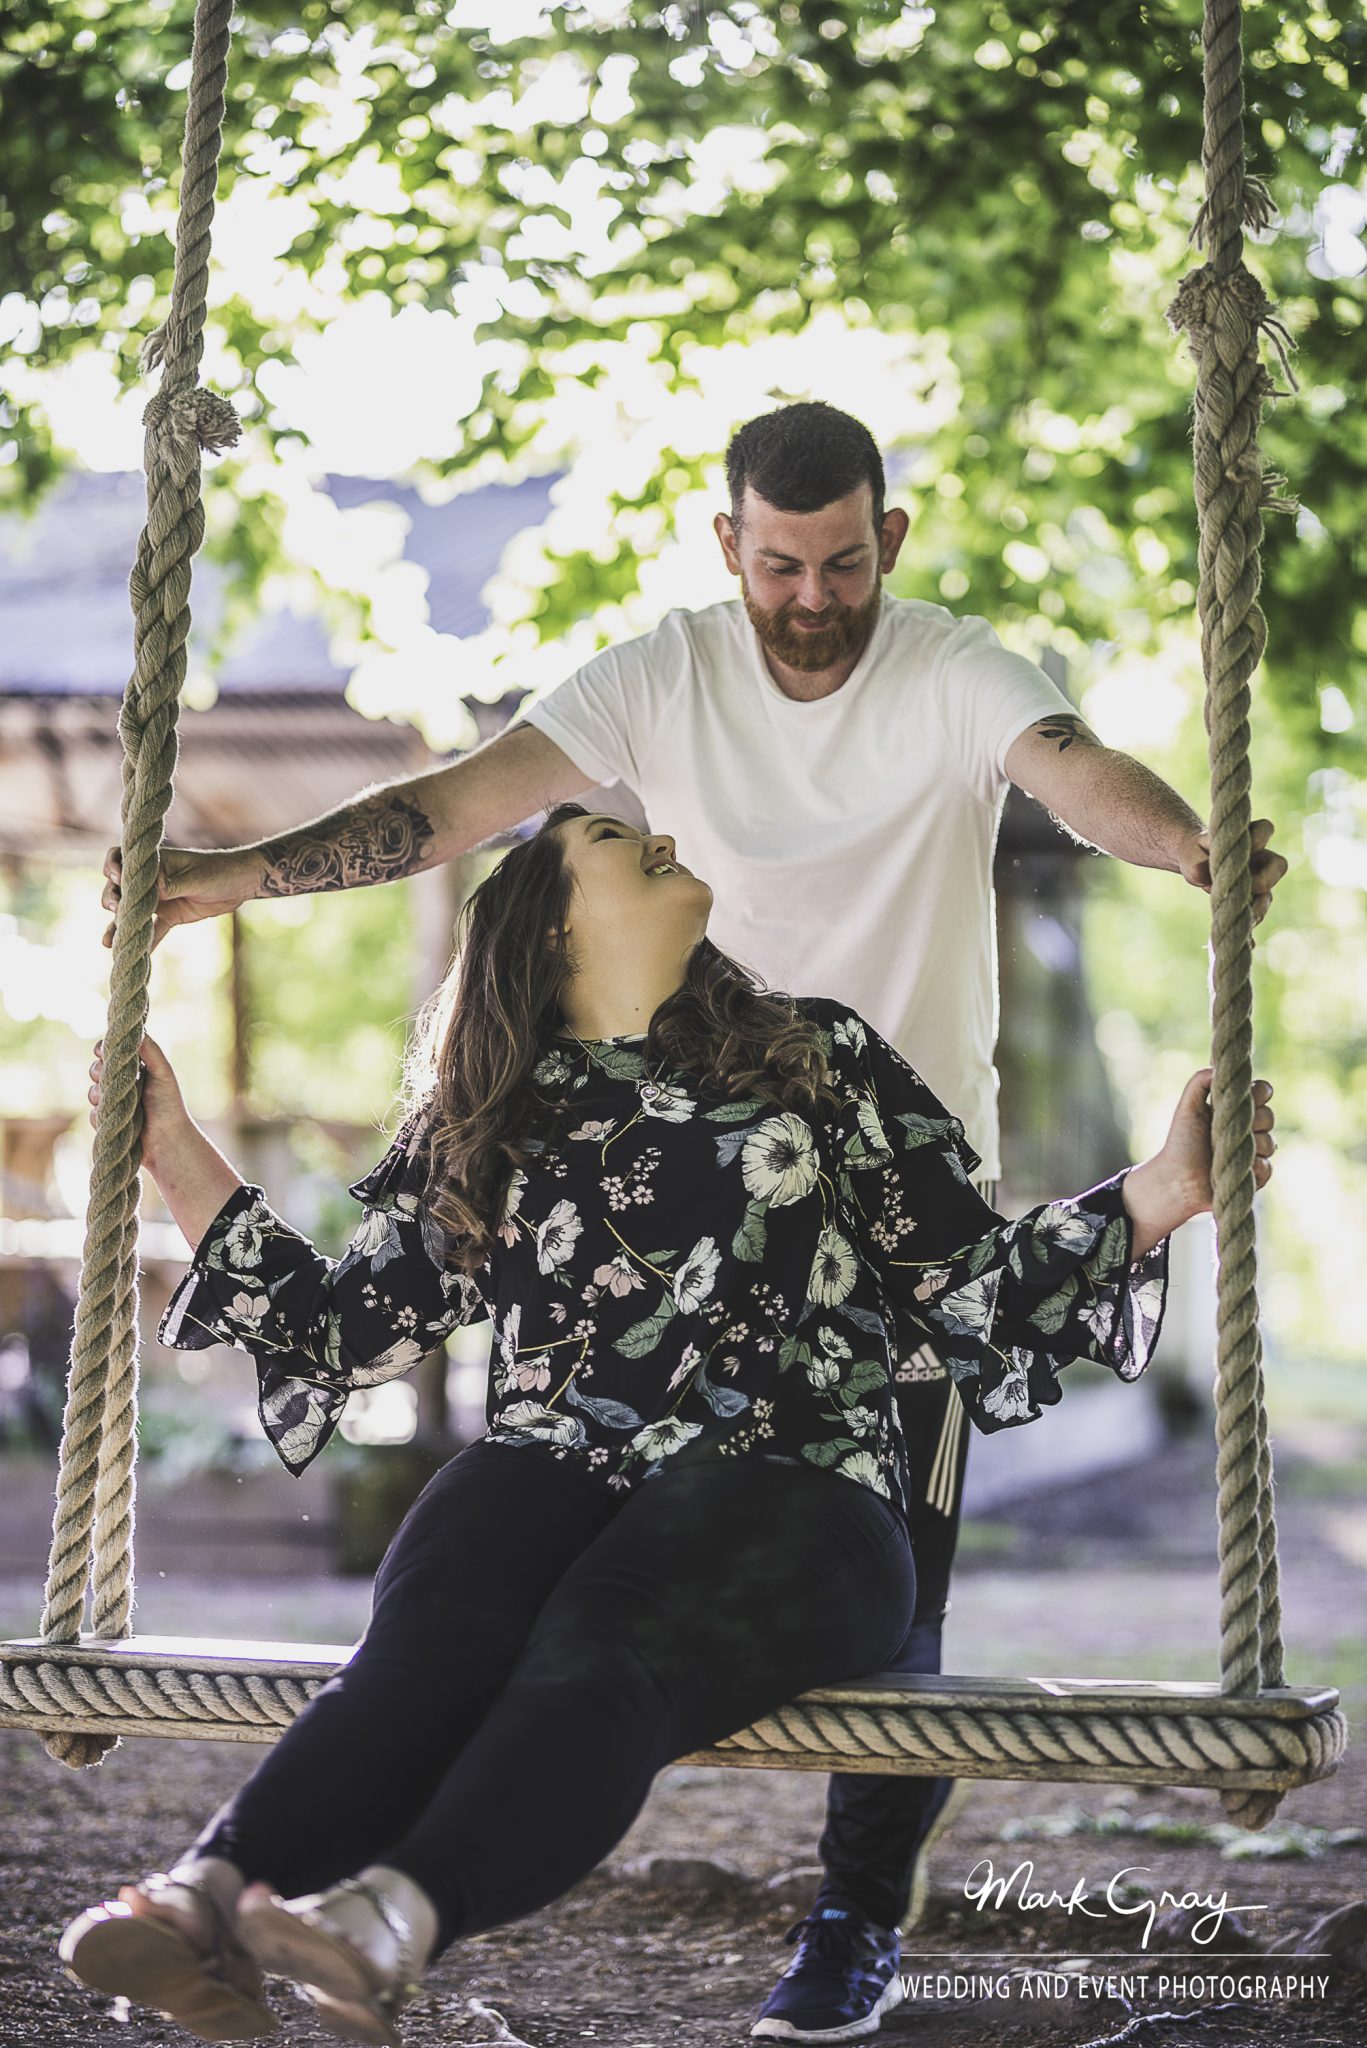 Engaged couple on the swing at the Dreys wedding and event venue